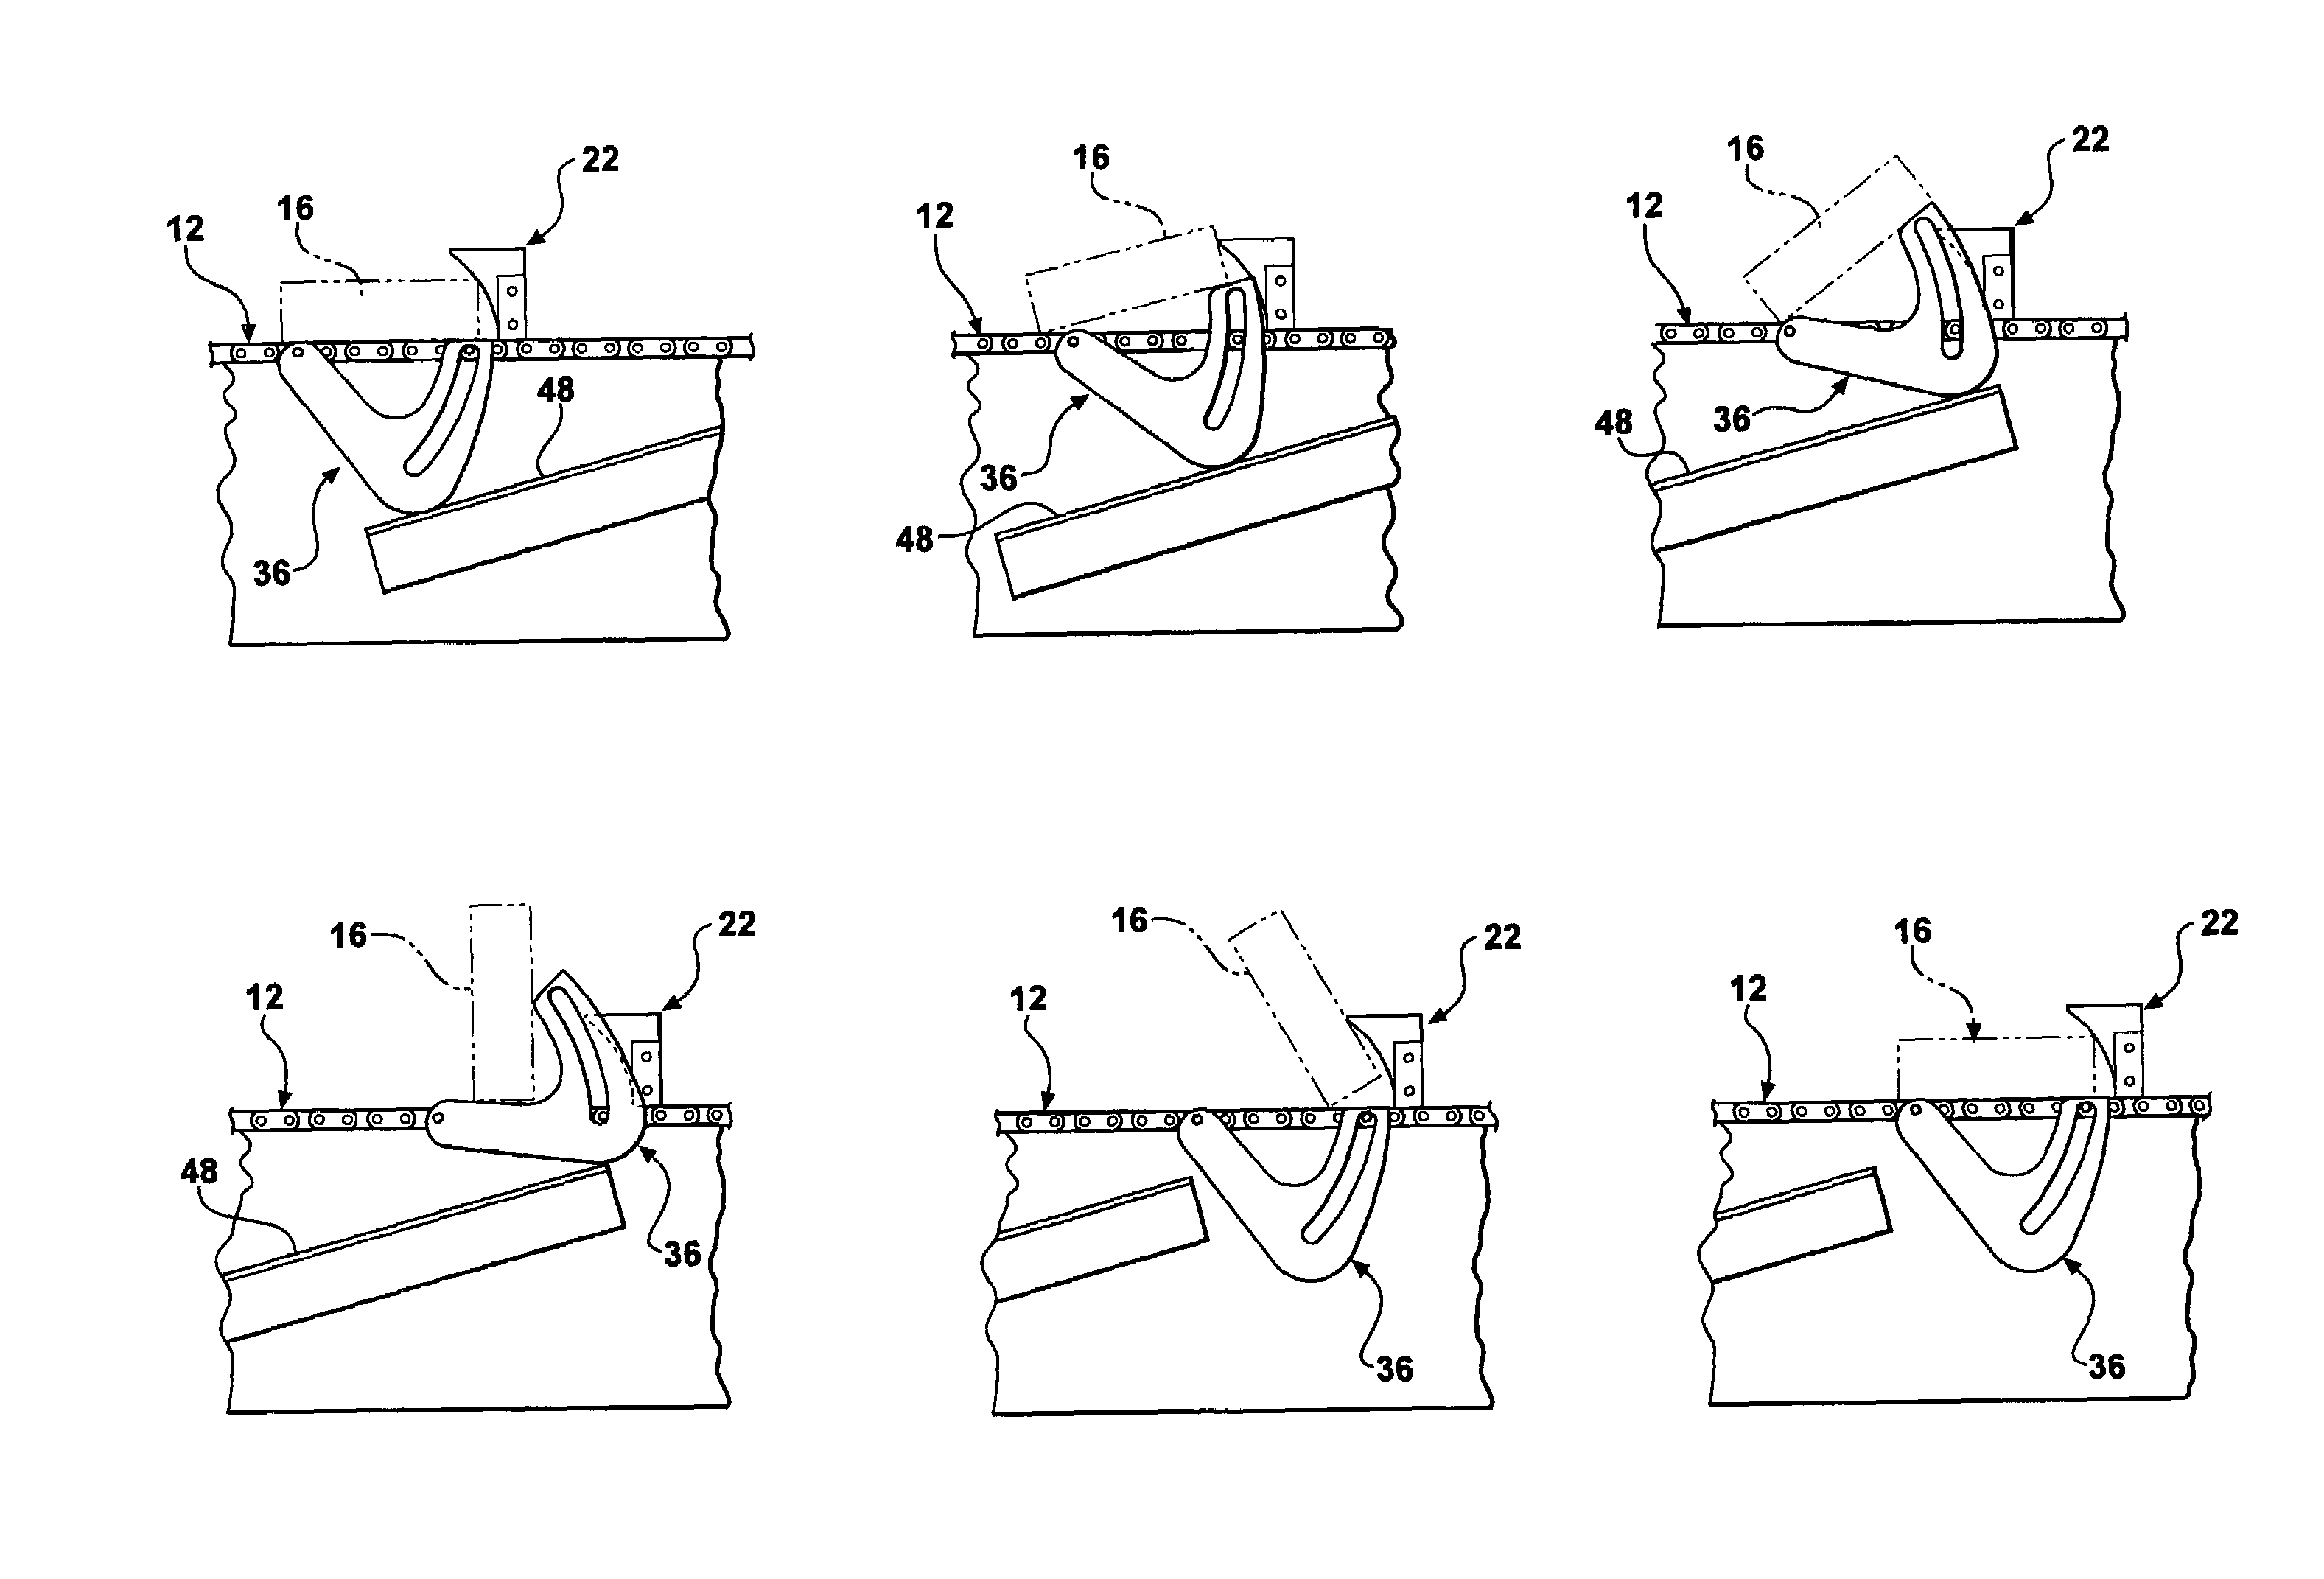 High speed turnover apparatus and method